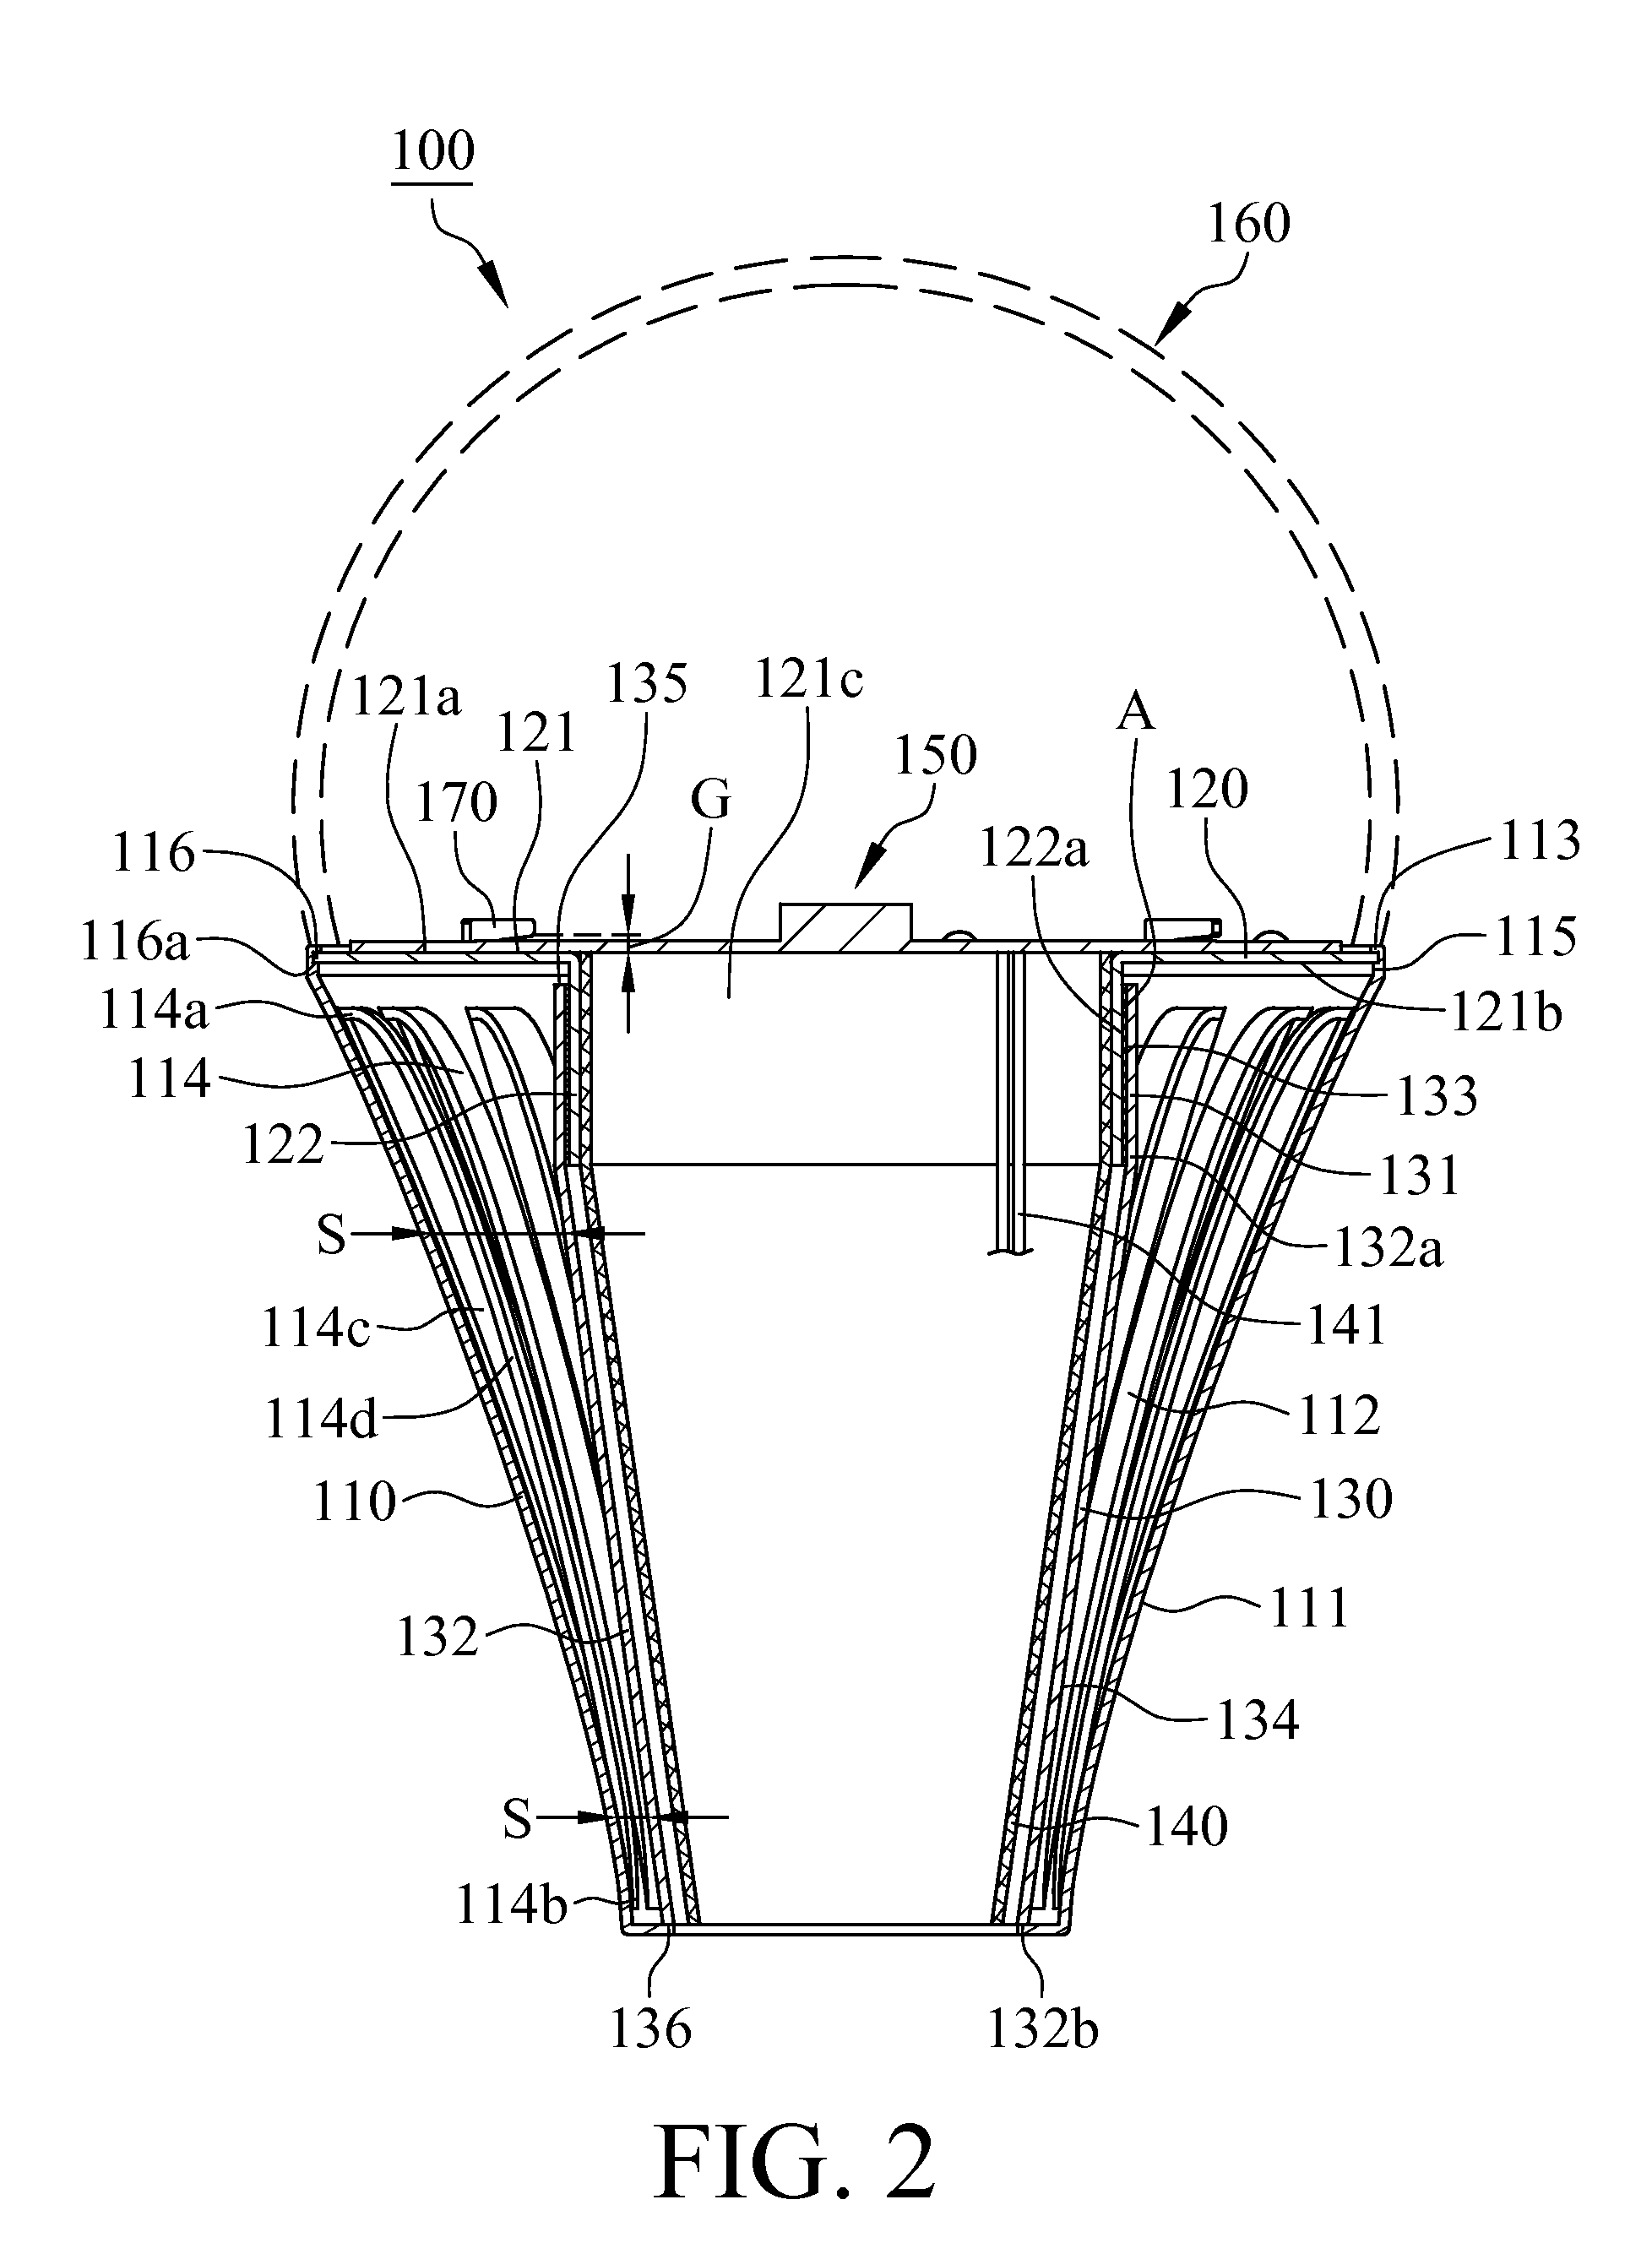 Lamp structure